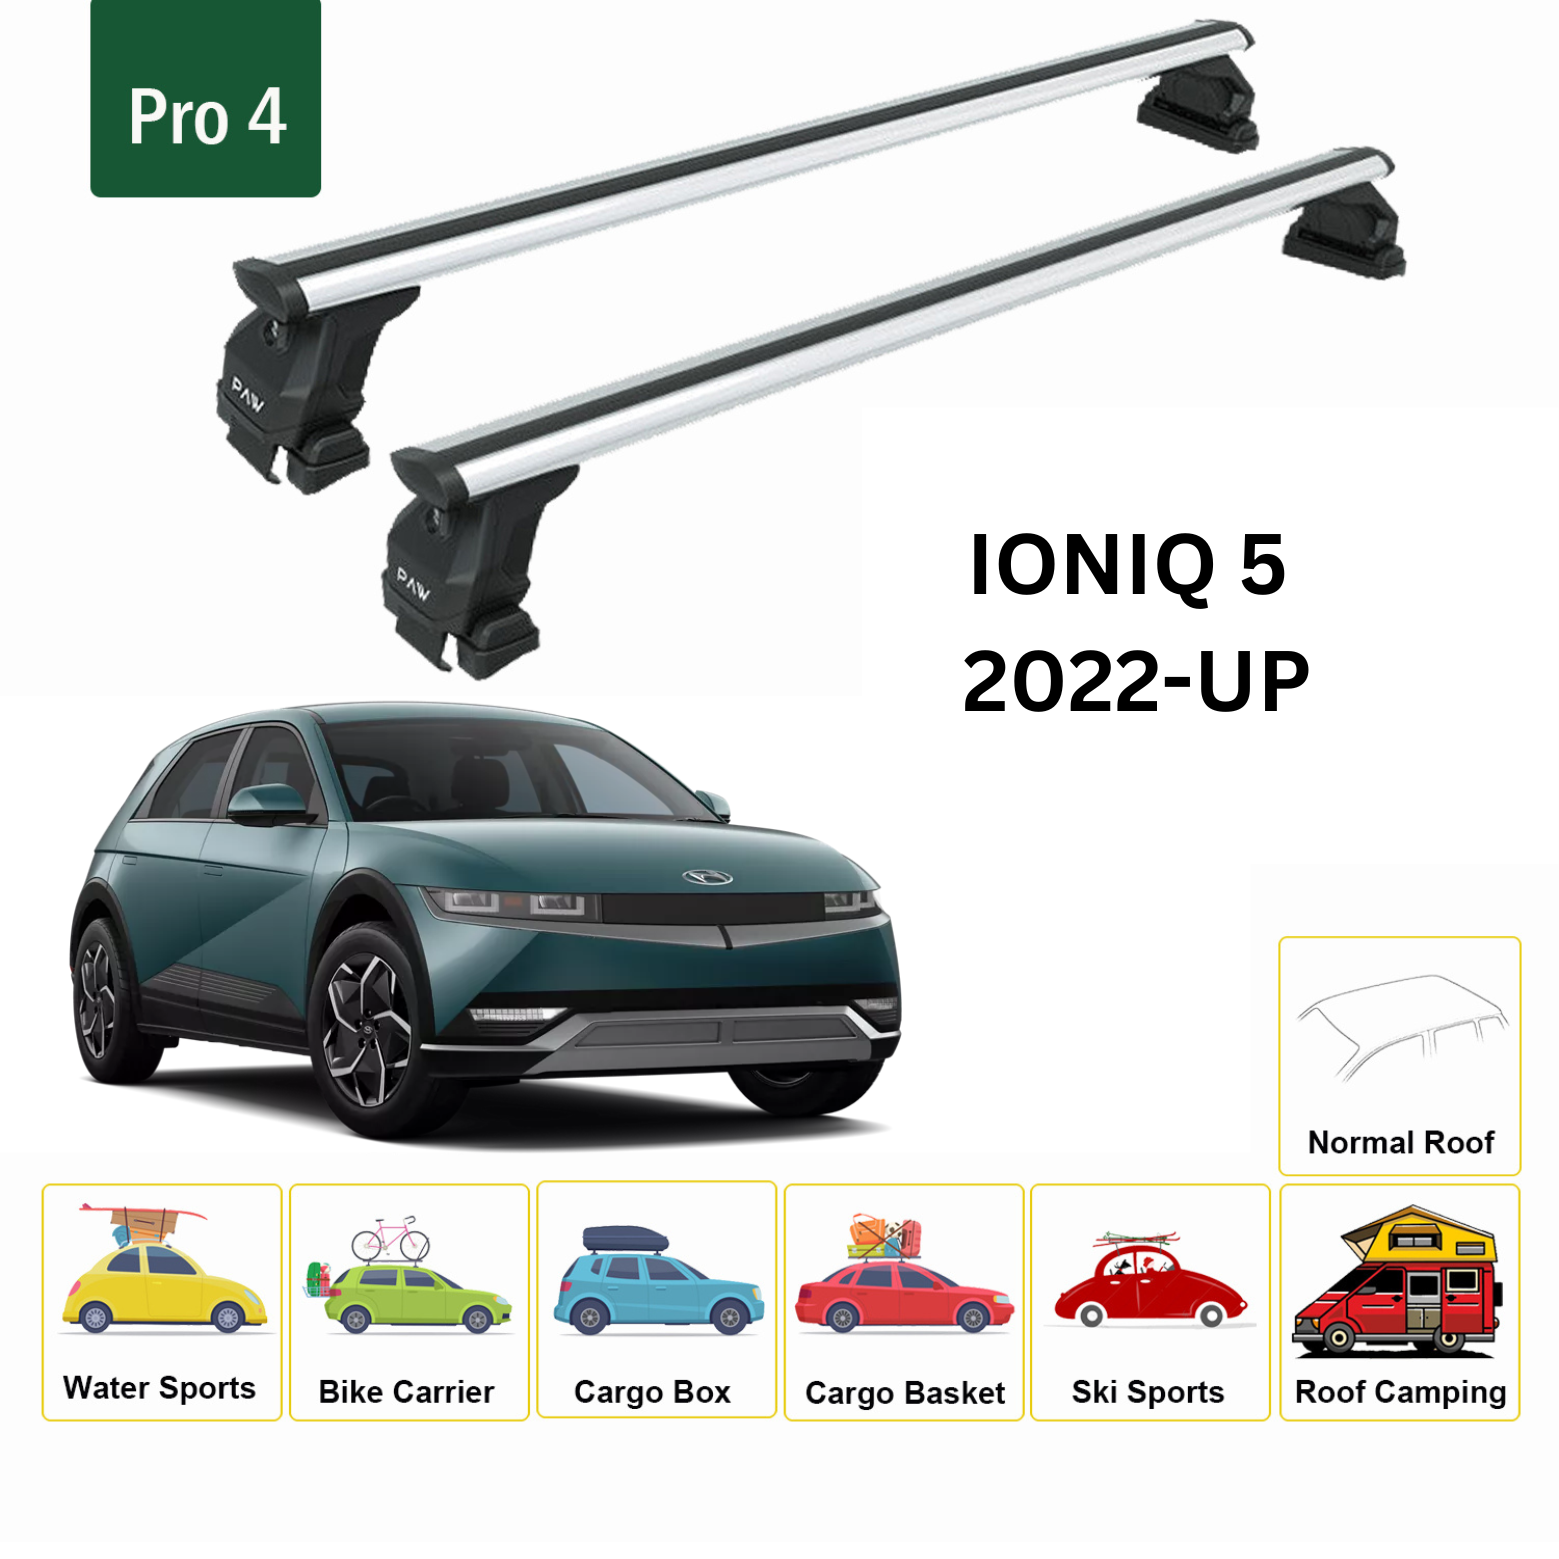 For Hyundai ioniq 5 2022-Up Roof Rack Cross Bars Normal Roof Alu Silver - 0